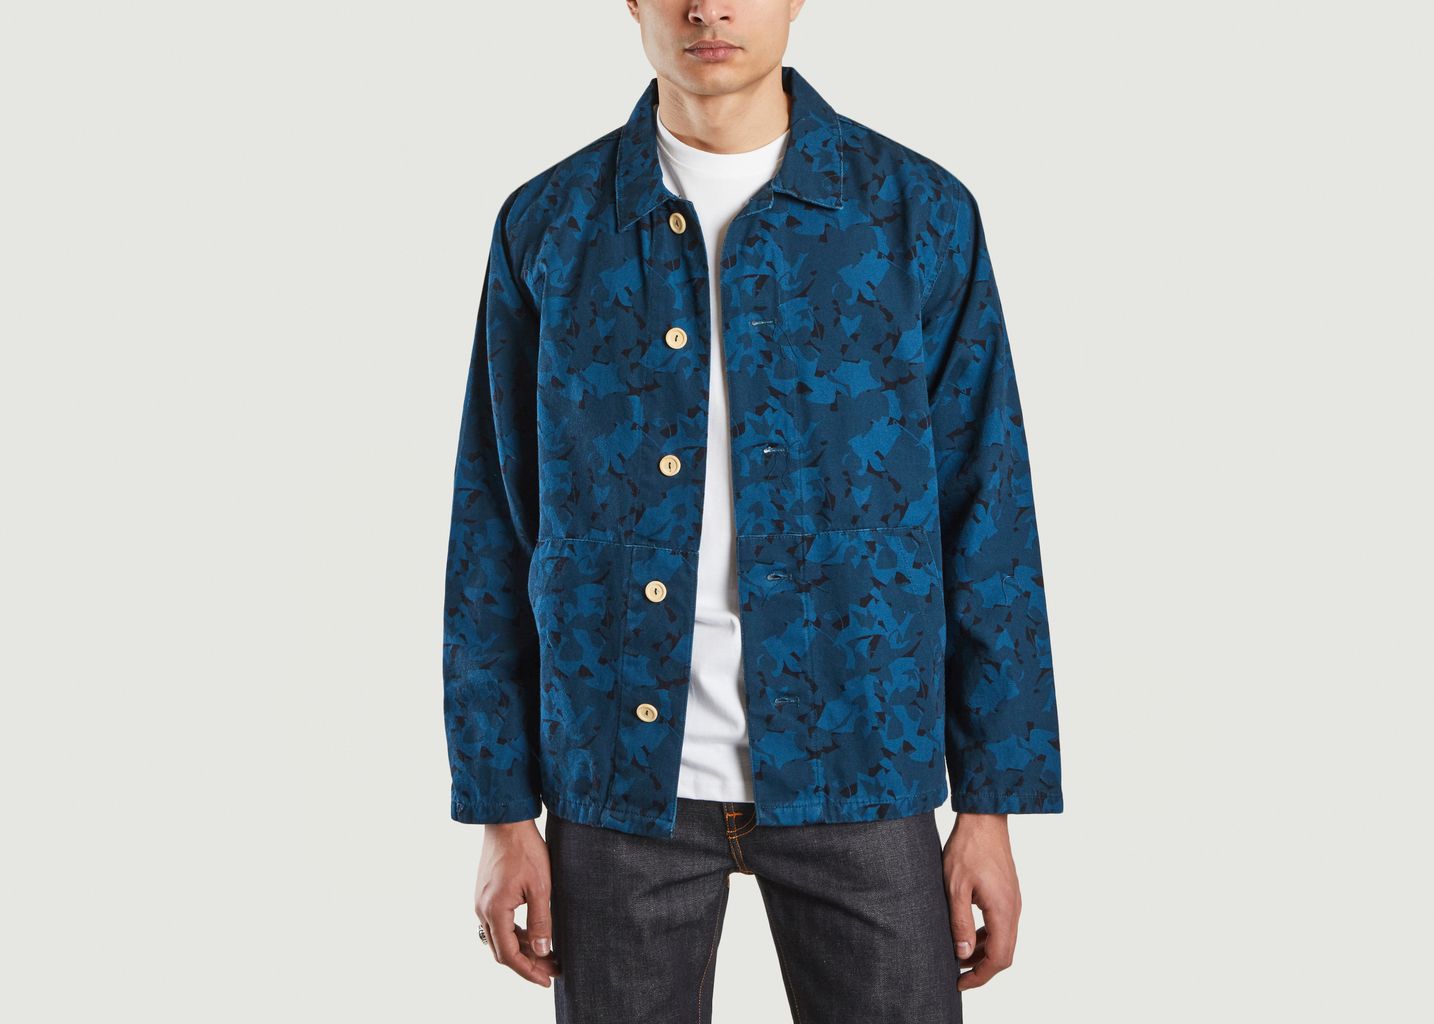 Heritage Fisherman Jacket Turquoise Armor Lux | L’Exception